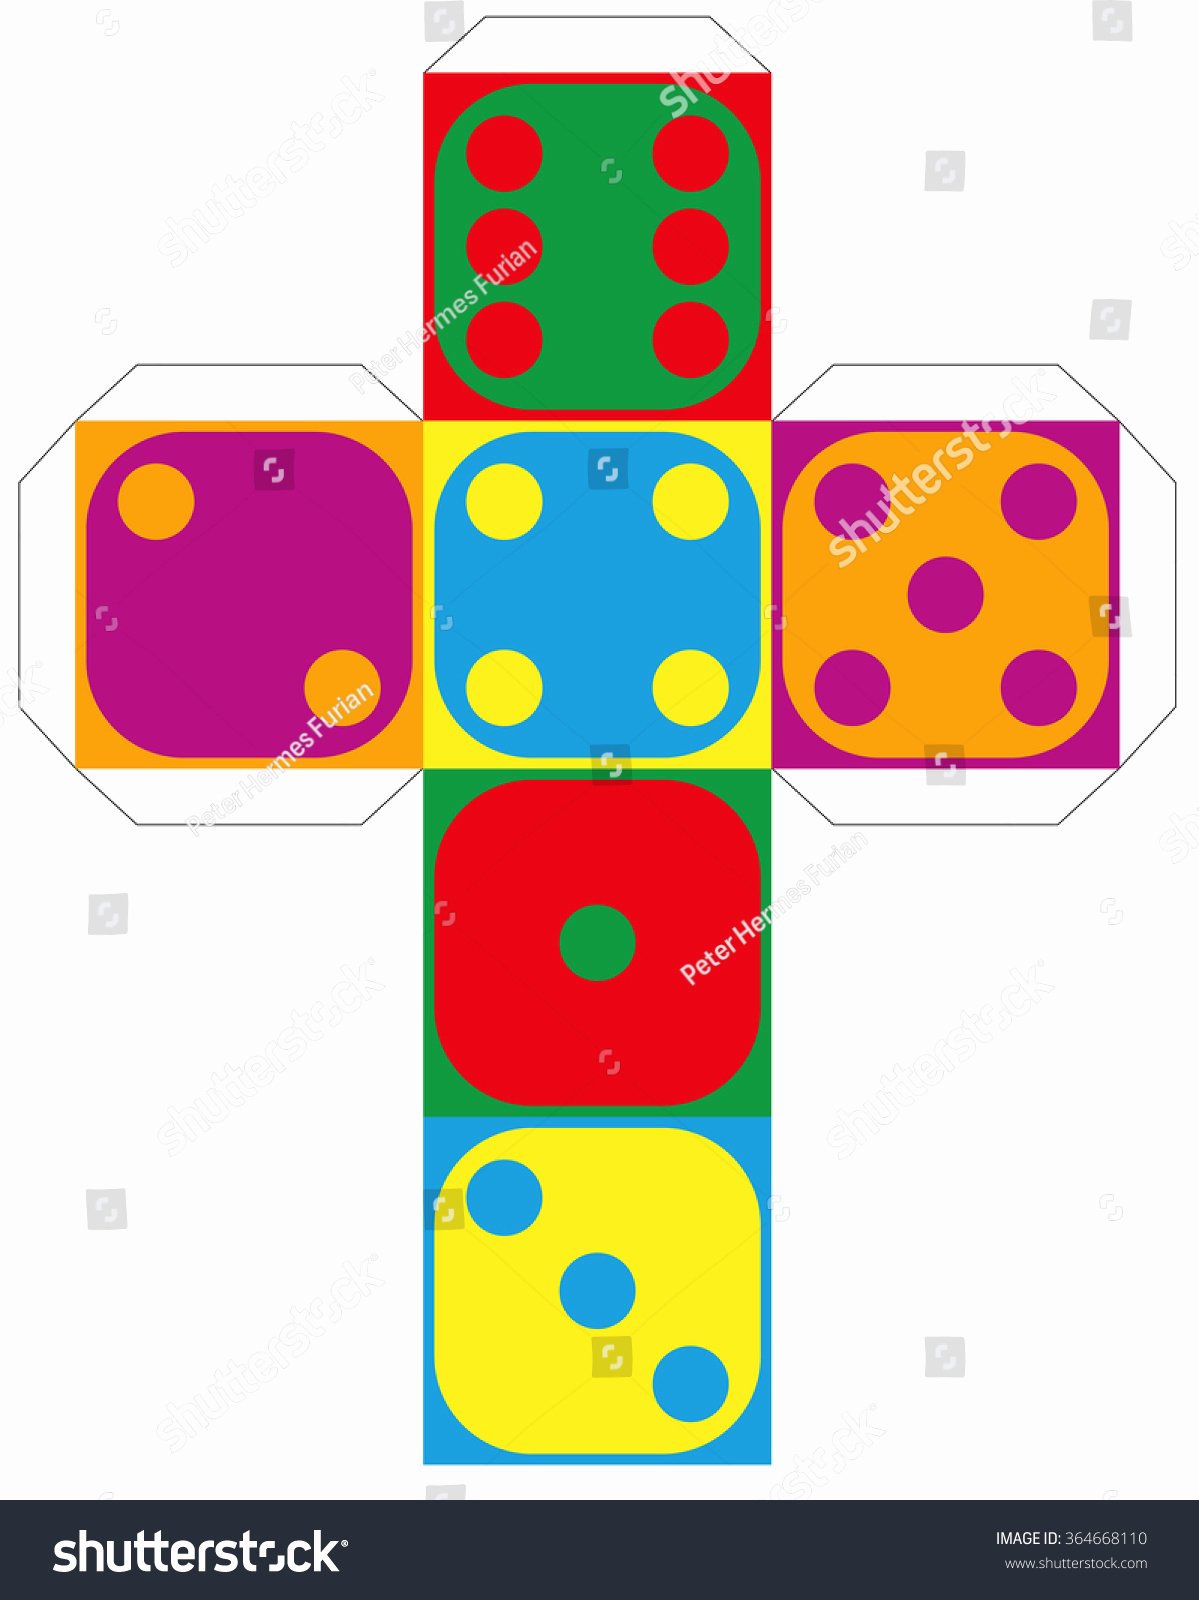 Editable Dice Template New Dice Template Model A Colorful Cube to Make A Three